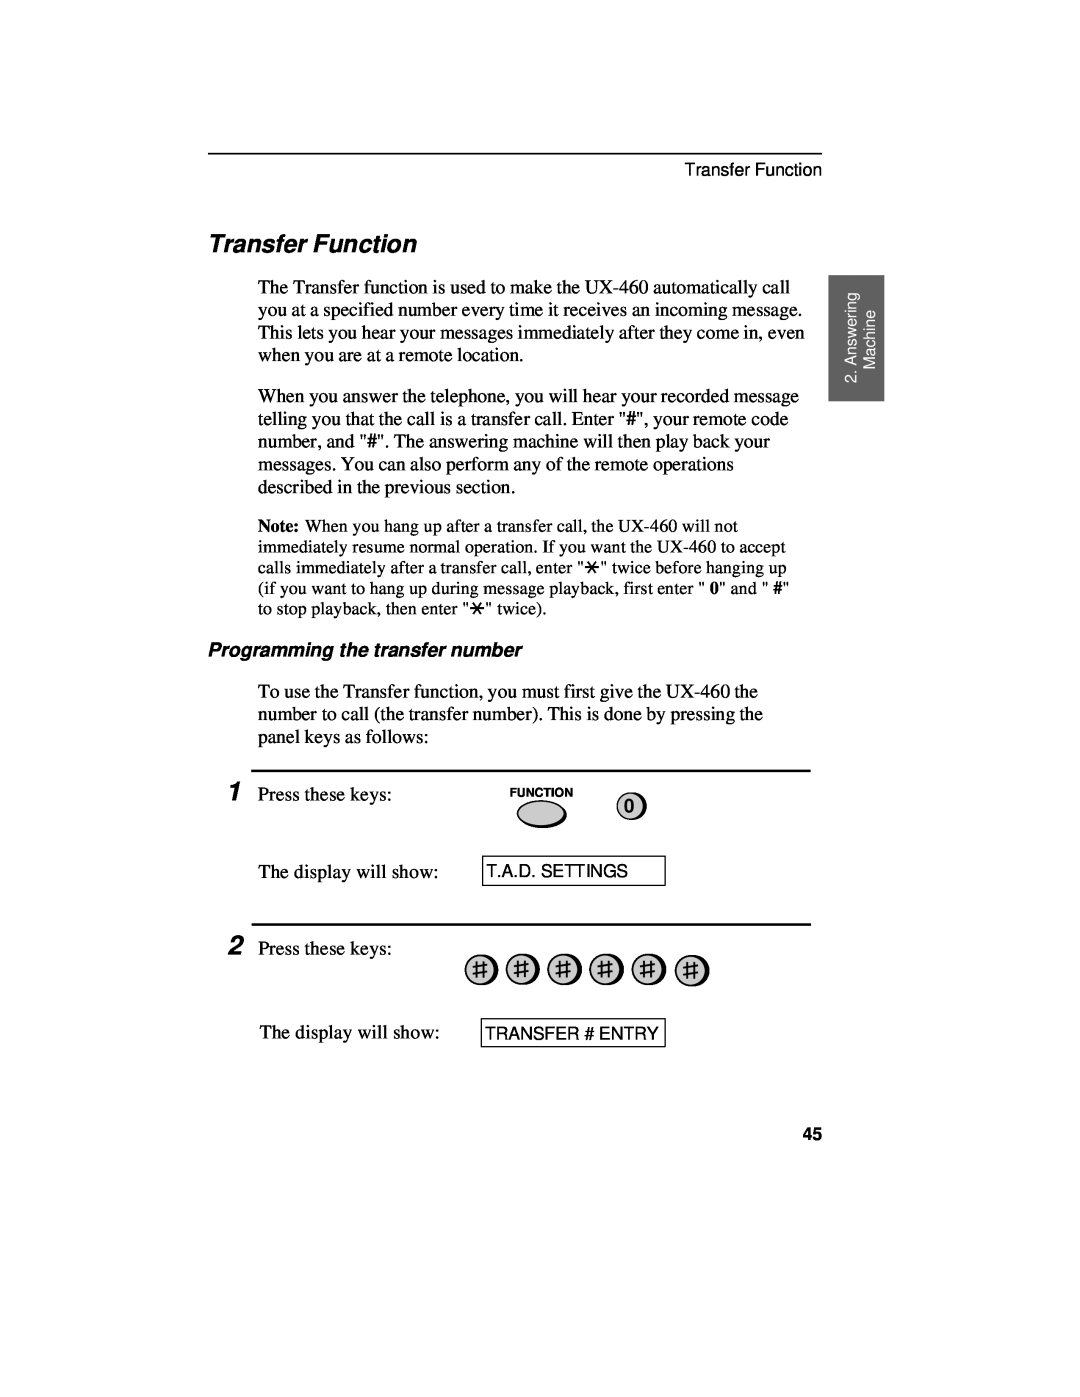 Sharp UX-460 operation manual Transfer Function, Programming the transfer number 